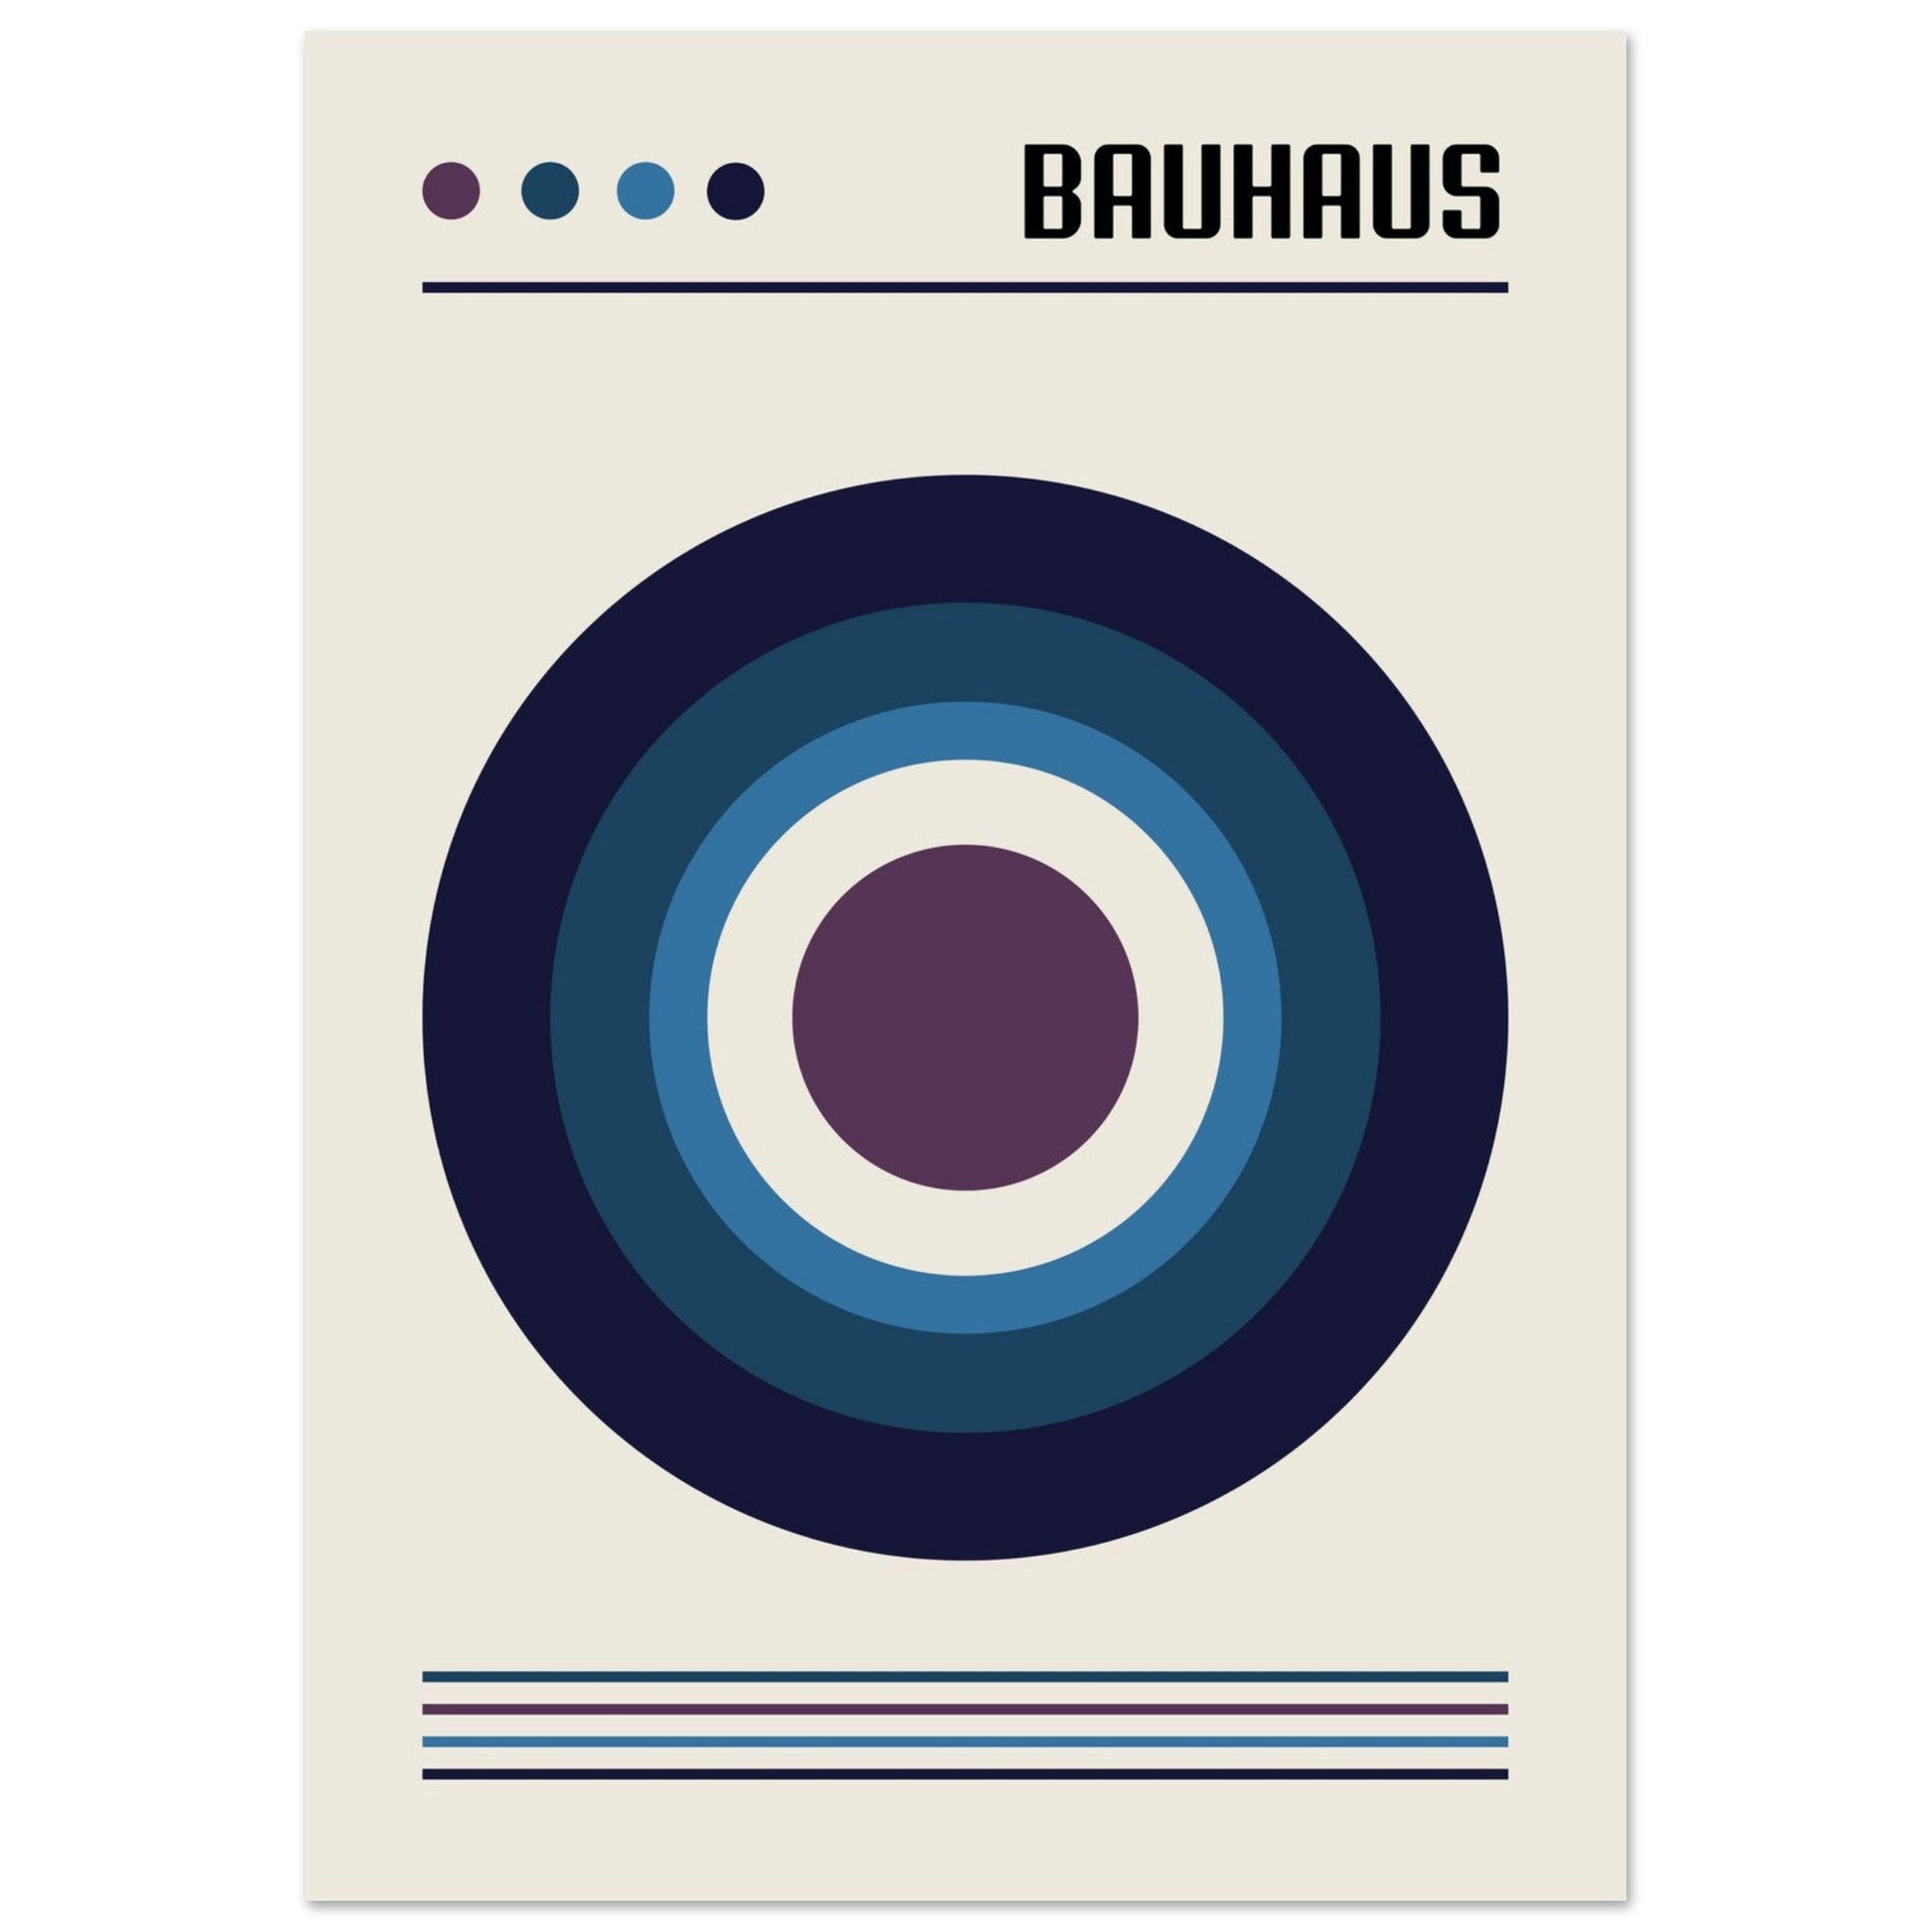 Bauhaus Concentric Circle Poster, No. 117, abstract, architecture, Blue, #illieeart